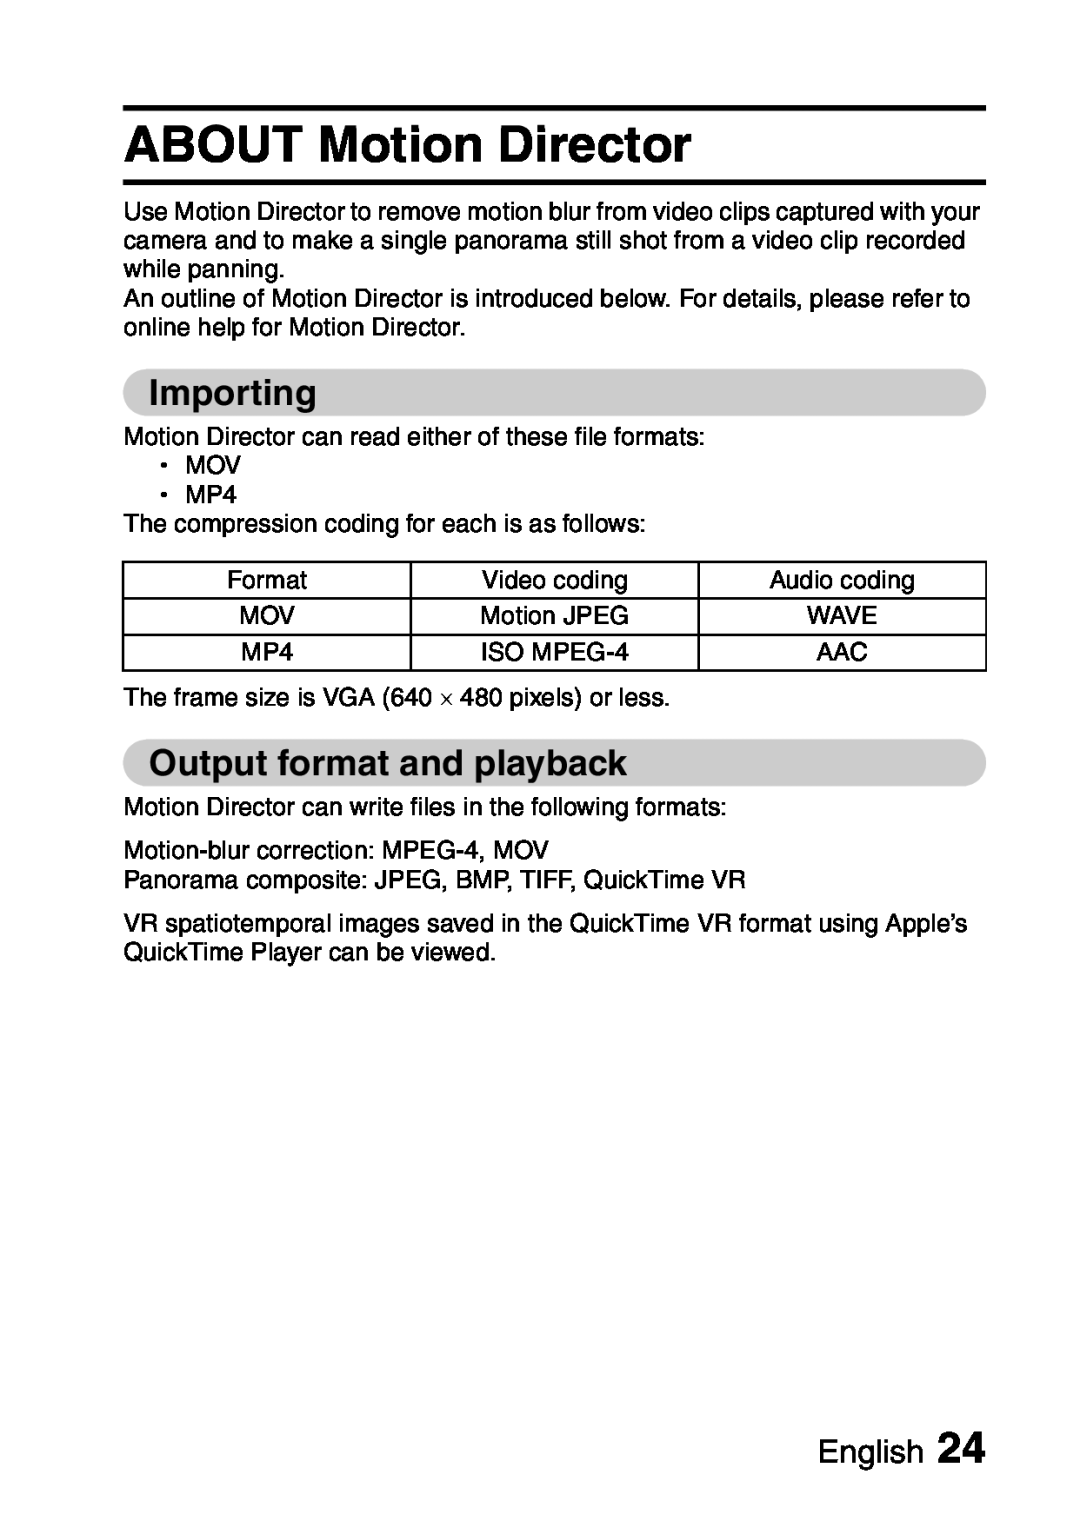 Sanyo VPC-S60 instruction manual ABOUT Motion Director, Importing, Output format and playback, English 